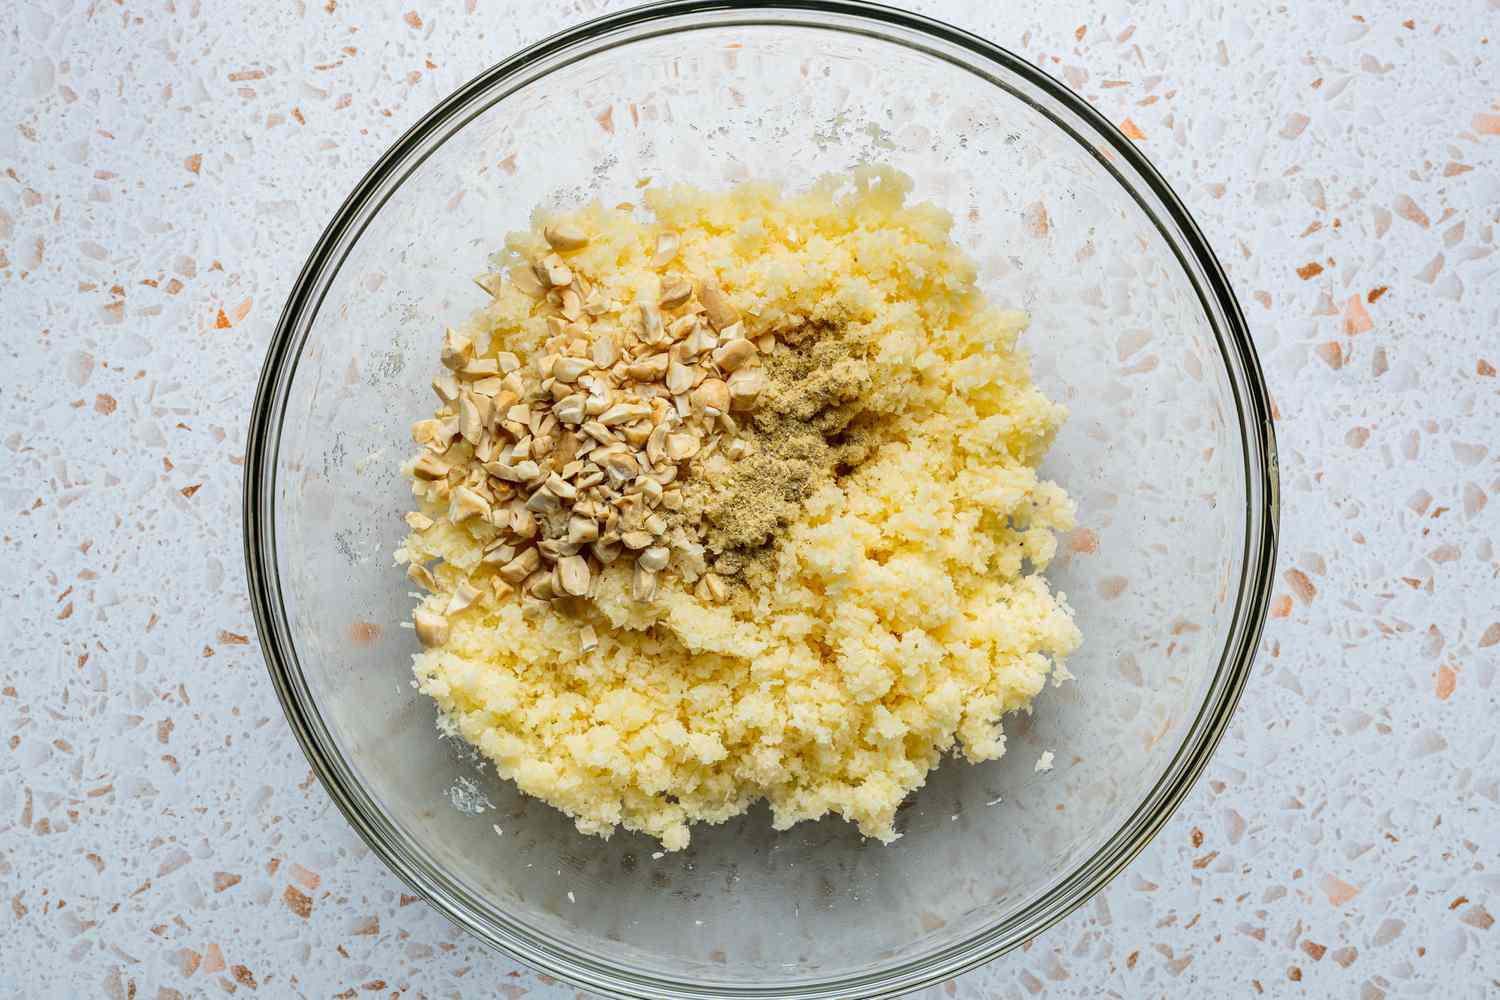 A large glass bowl of coconut-milk powder and syrup mixture with ground cardamom and broken cashews